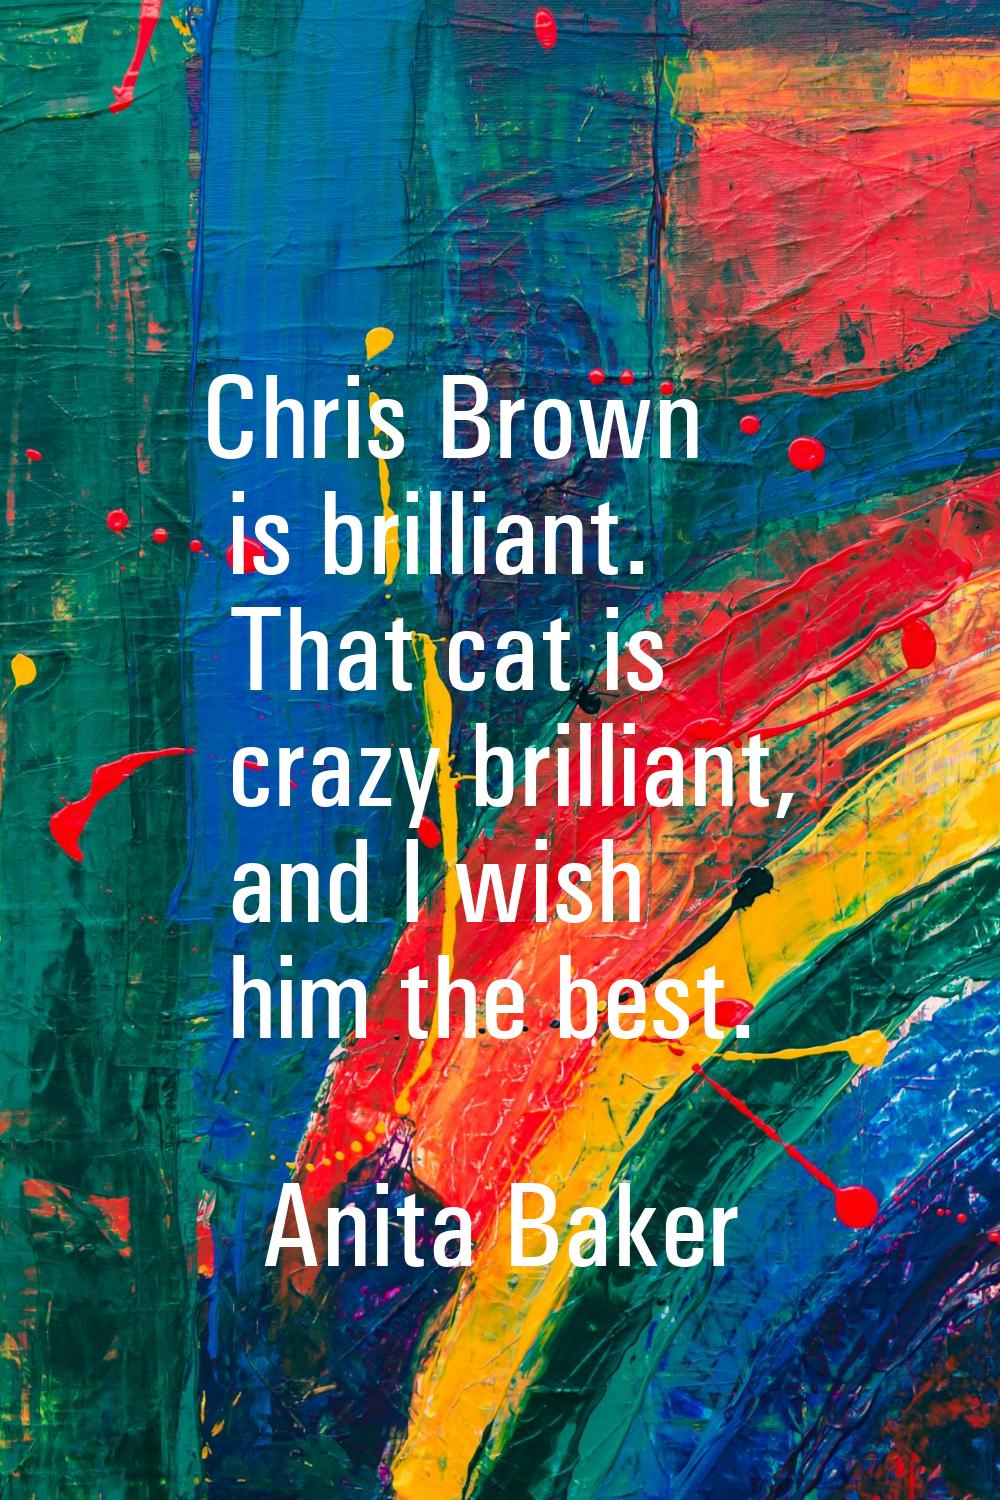 Chris Brown is brilliant. That cat is crazy brilliant, and I wish him the best.